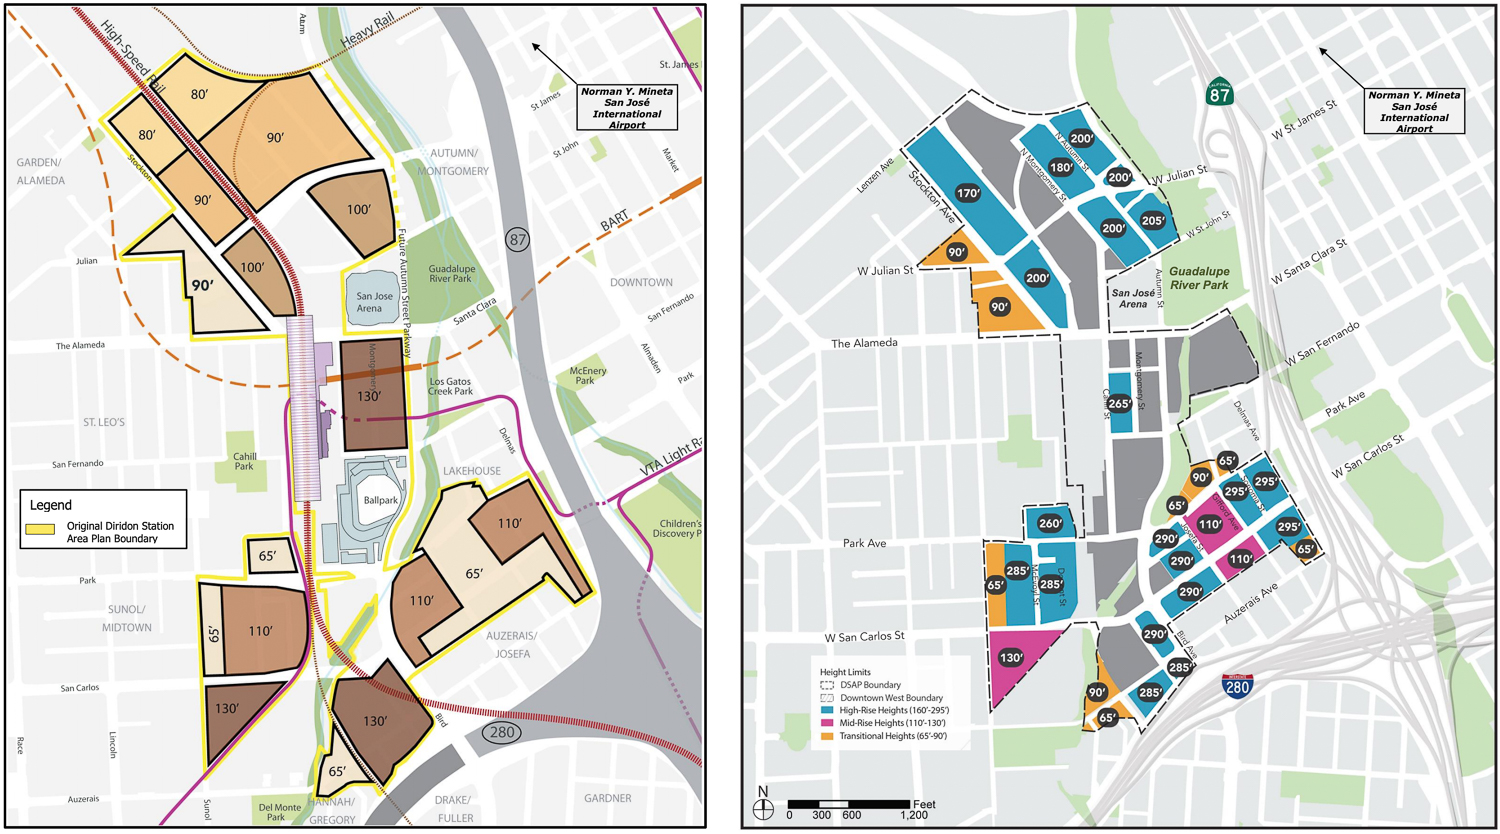 Diridon Station original (left) and proposed (right) height limits, Google's Downtown West land is highlighted in grey, illustration from City of San Jose